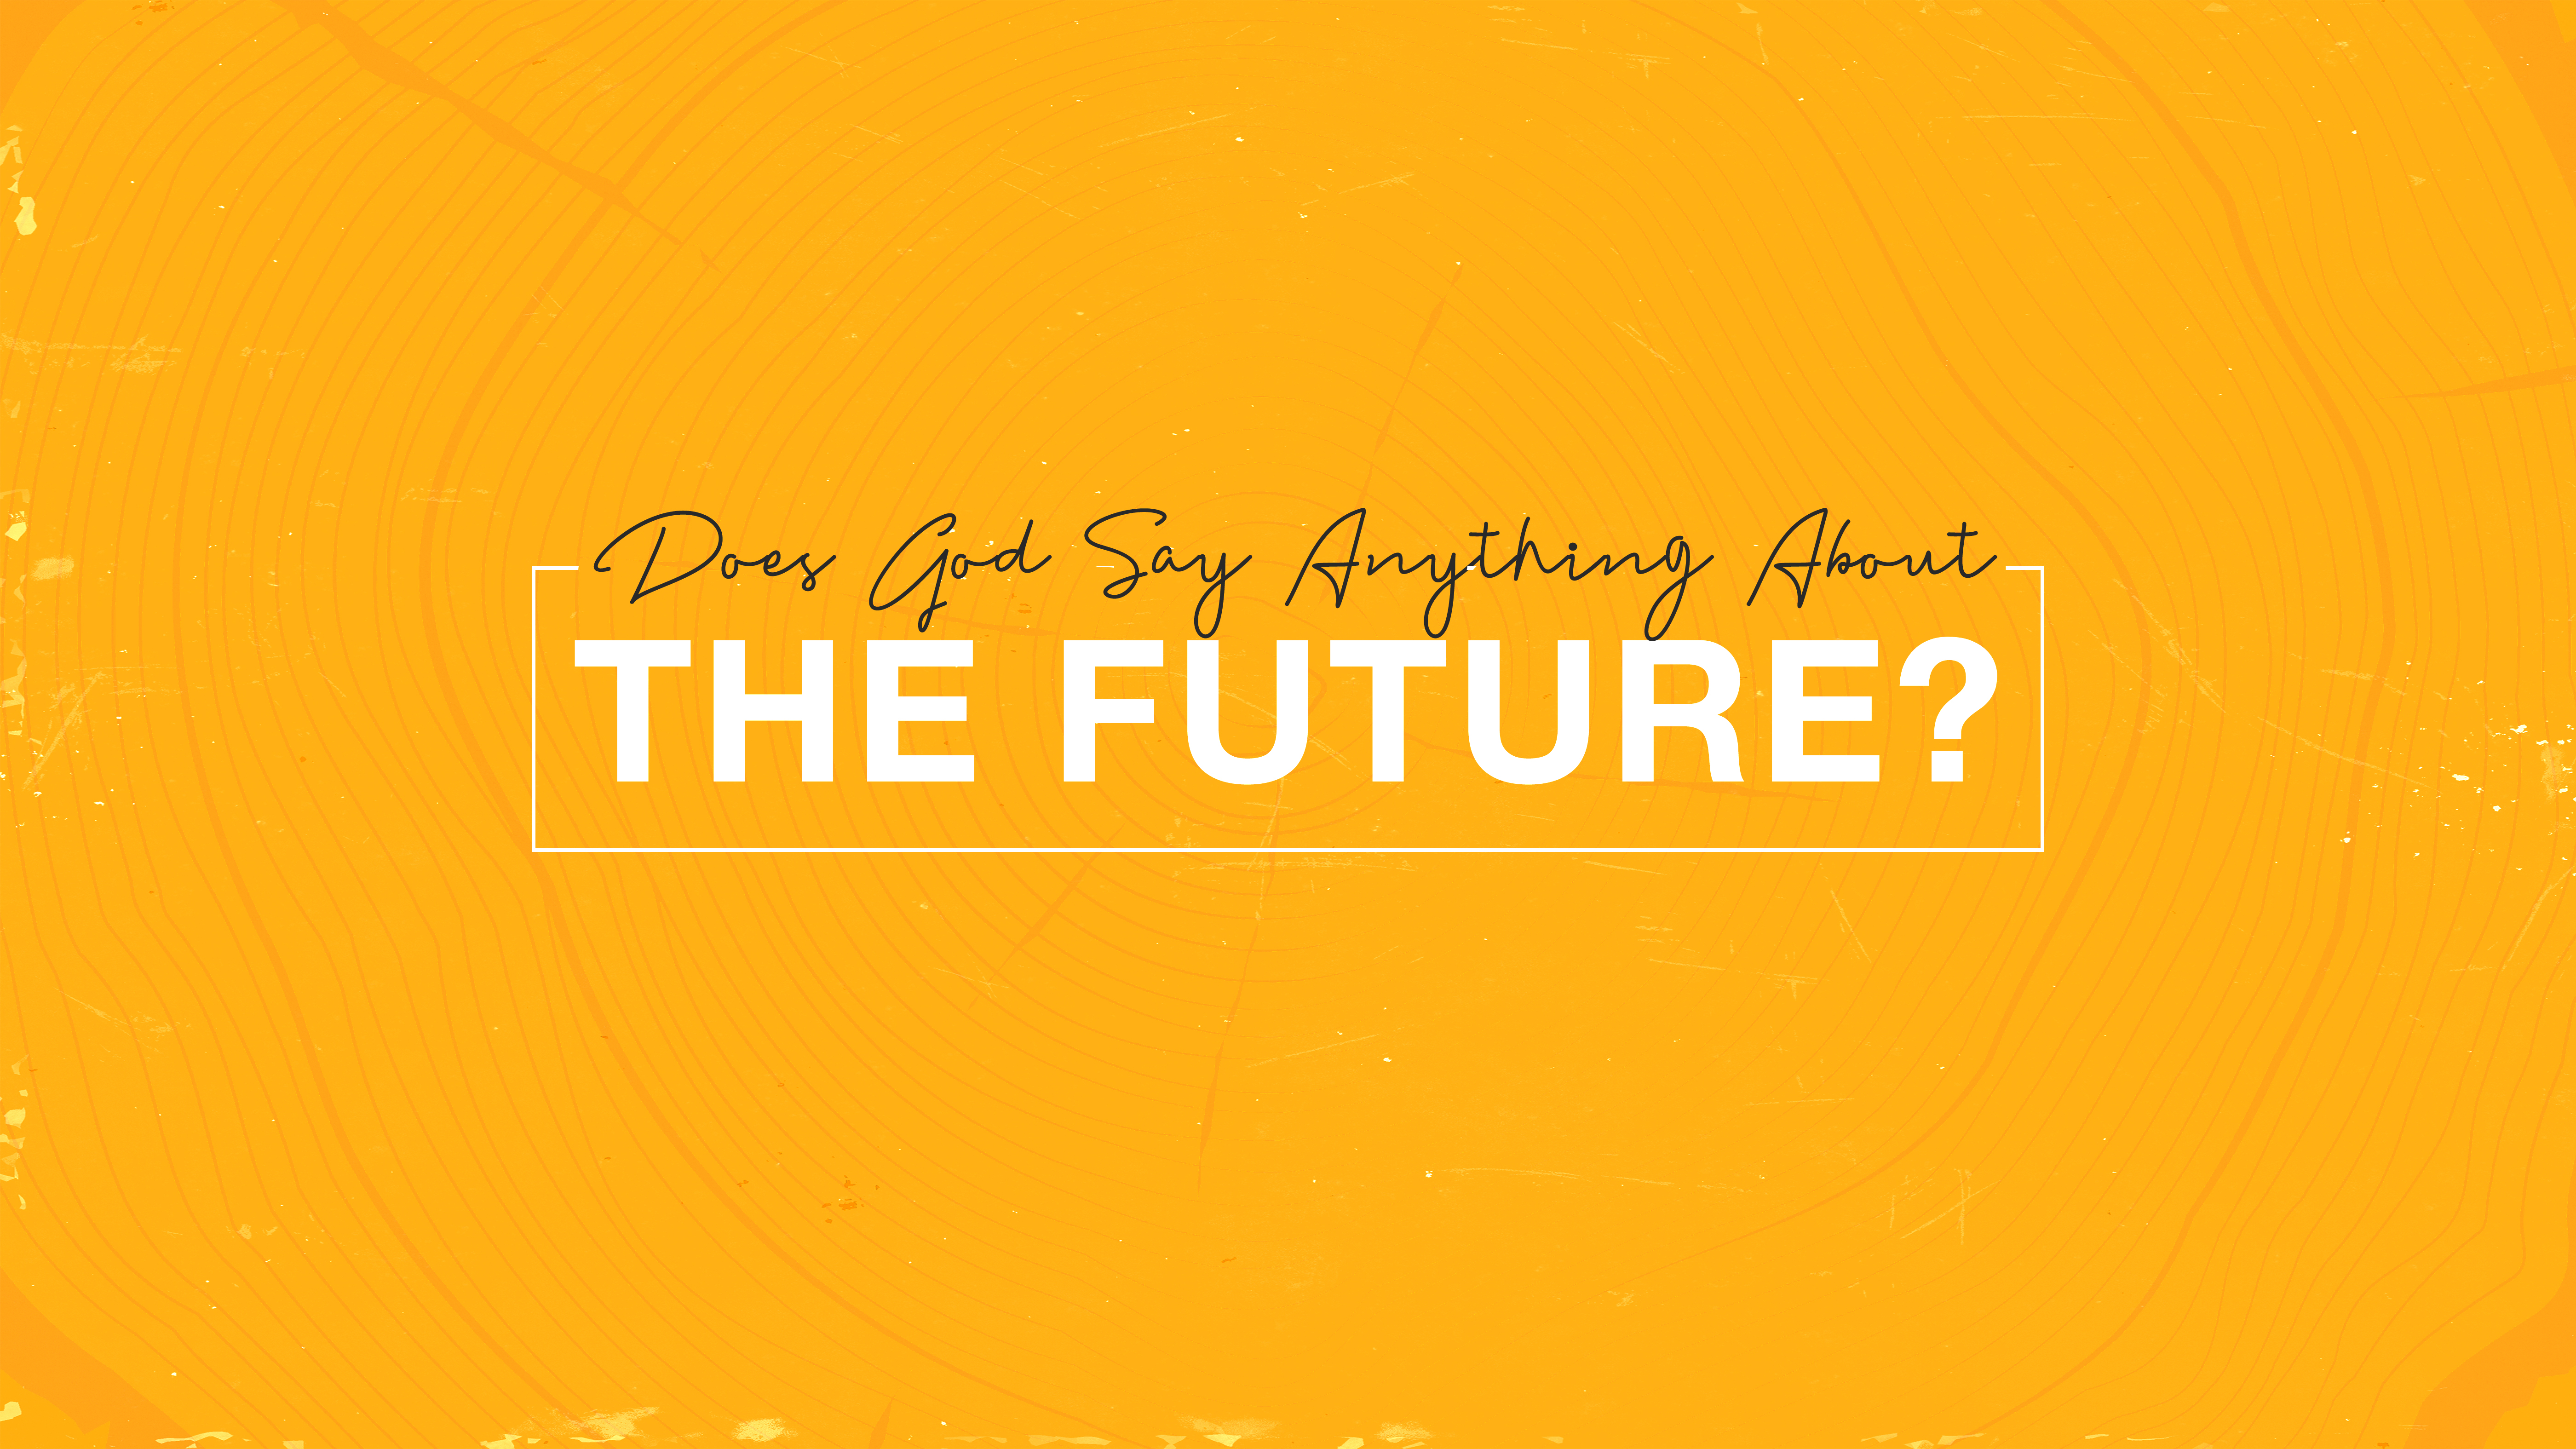 Does God Say Anything About the Future?

Next session to be determined
